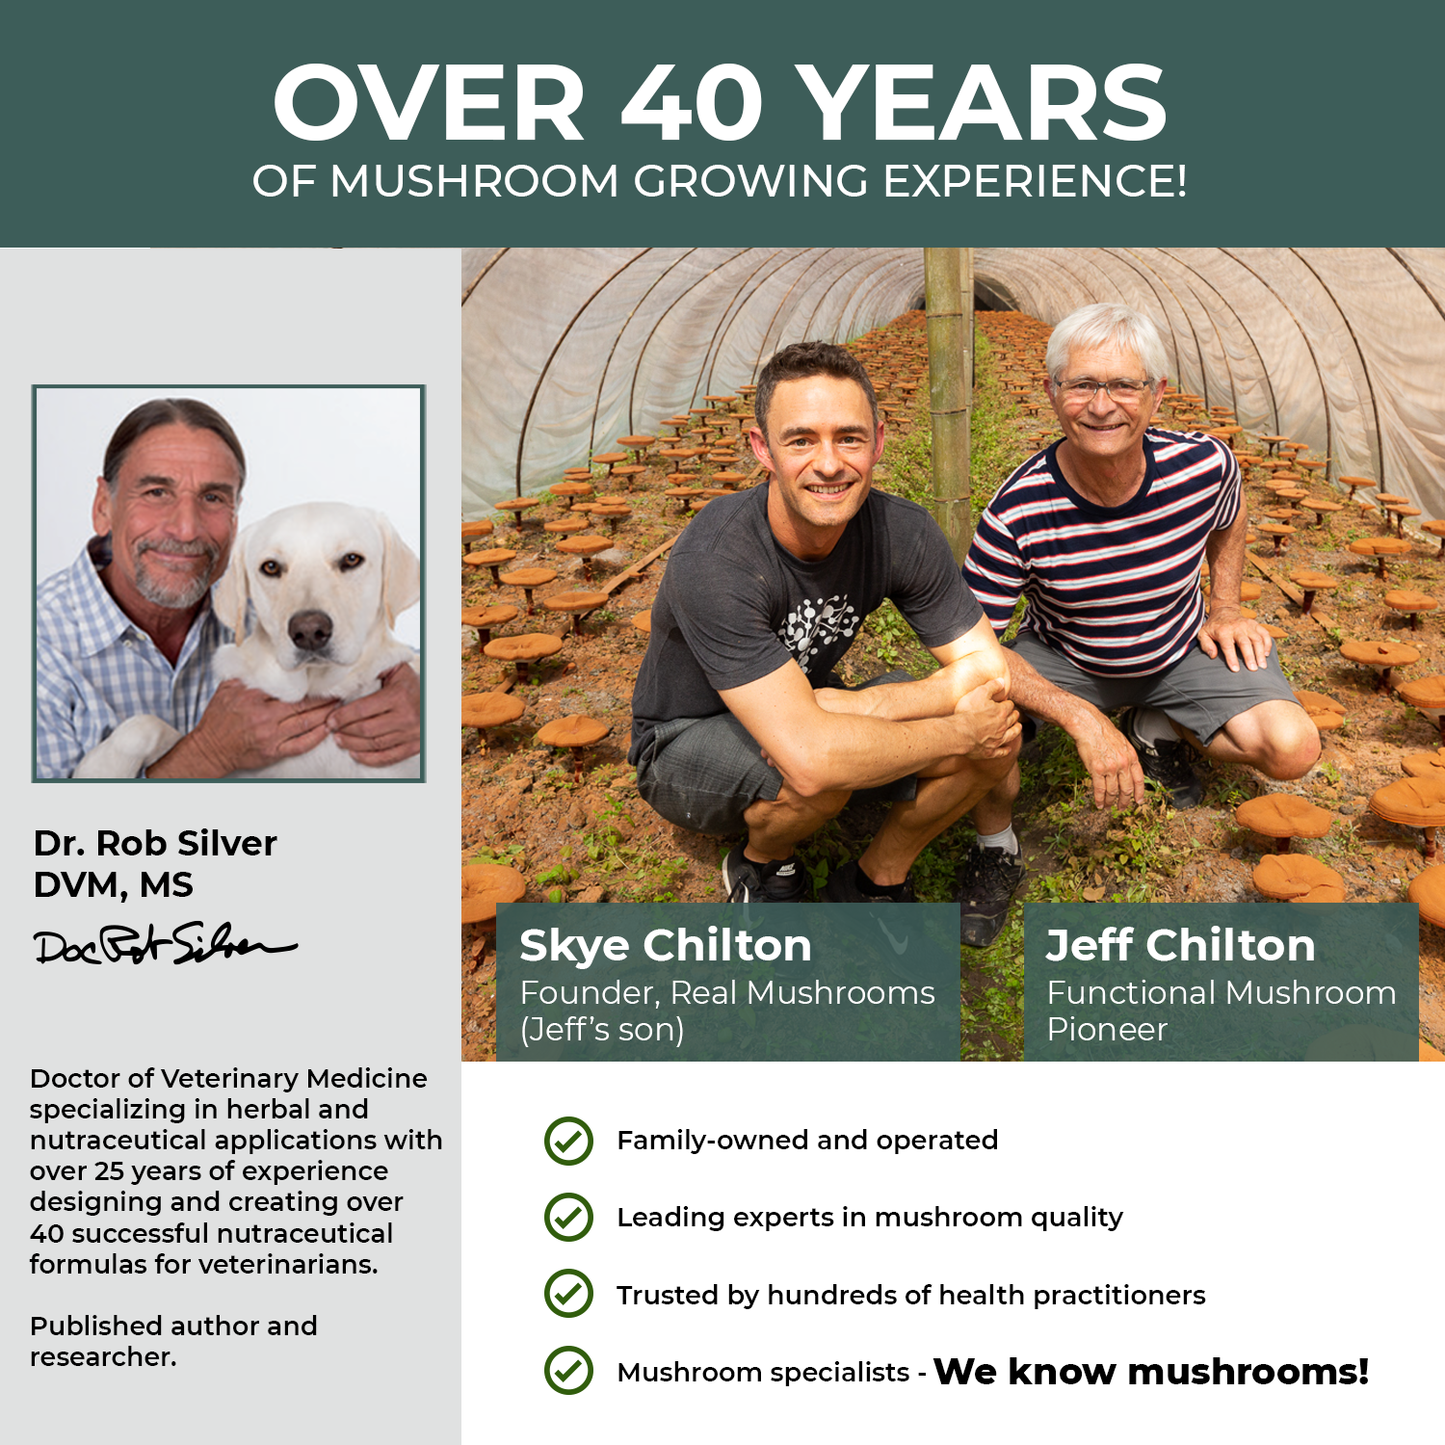 Over 40 years of Real Mushrooms' Turkey Tail Extract Capsules for Pets growing experience.